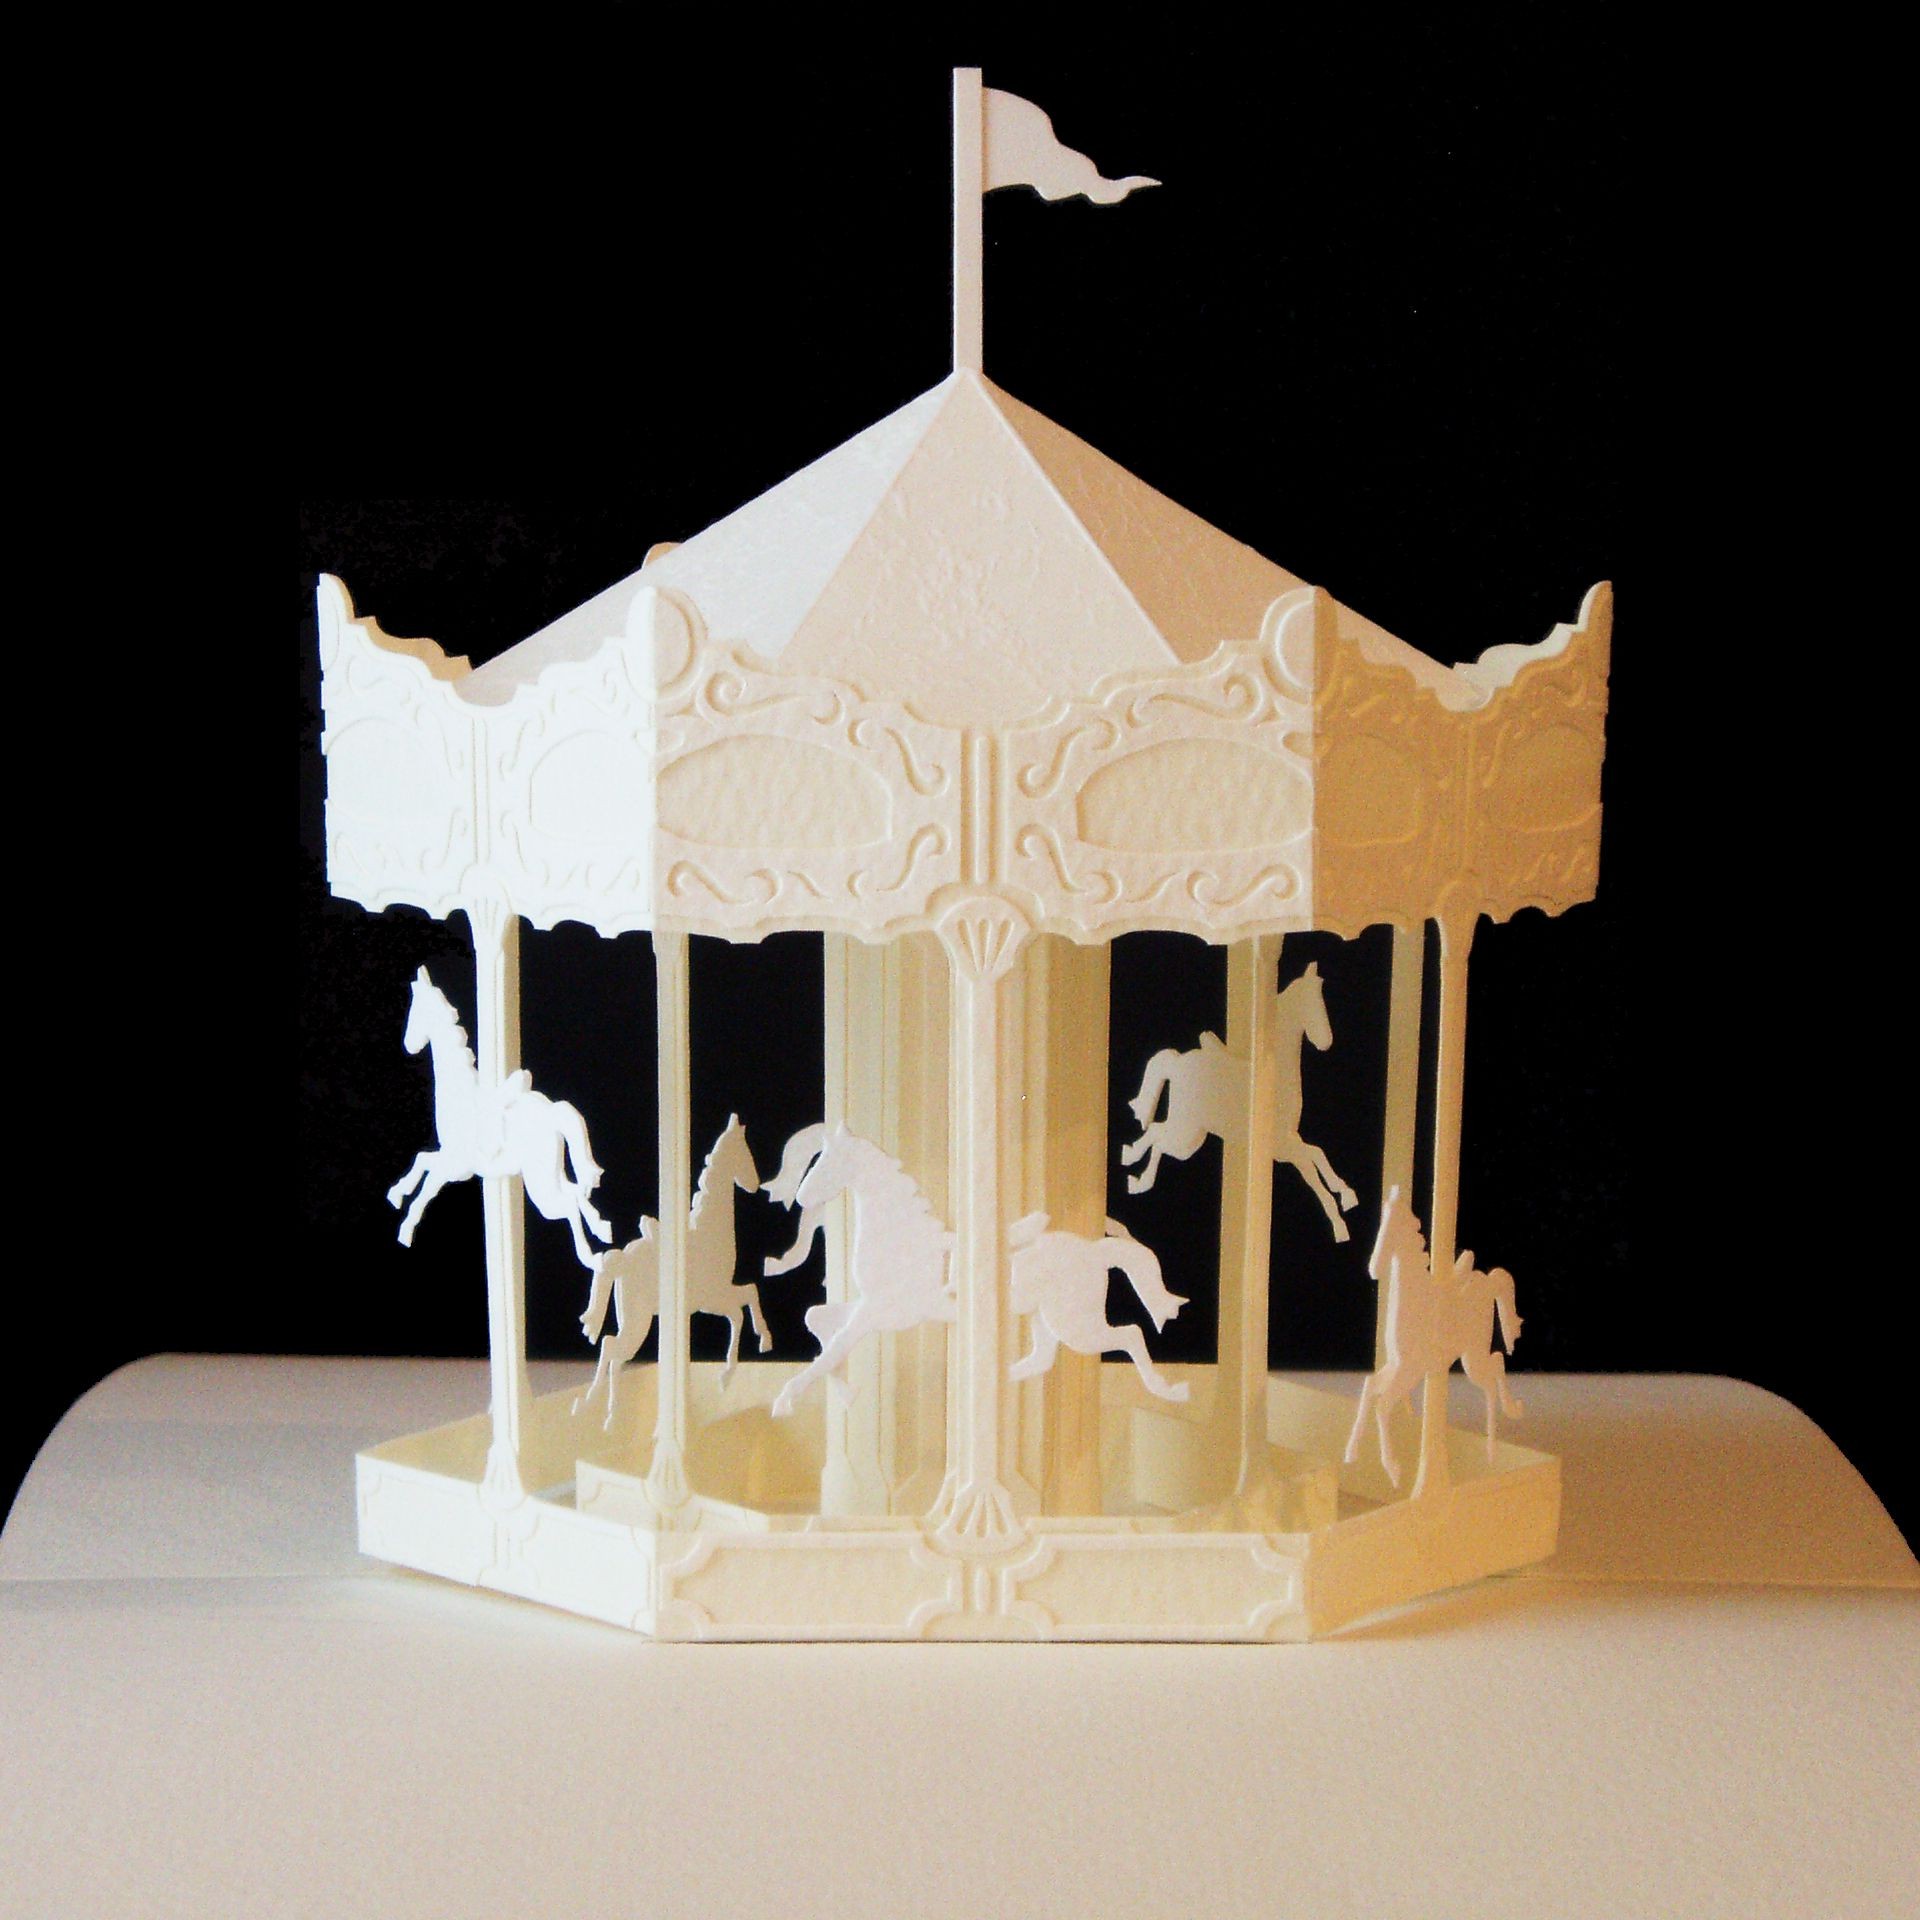 Titanic Papercraft Merry Go Round Pop Up Paper Craft This Artist S Work is Incredibly